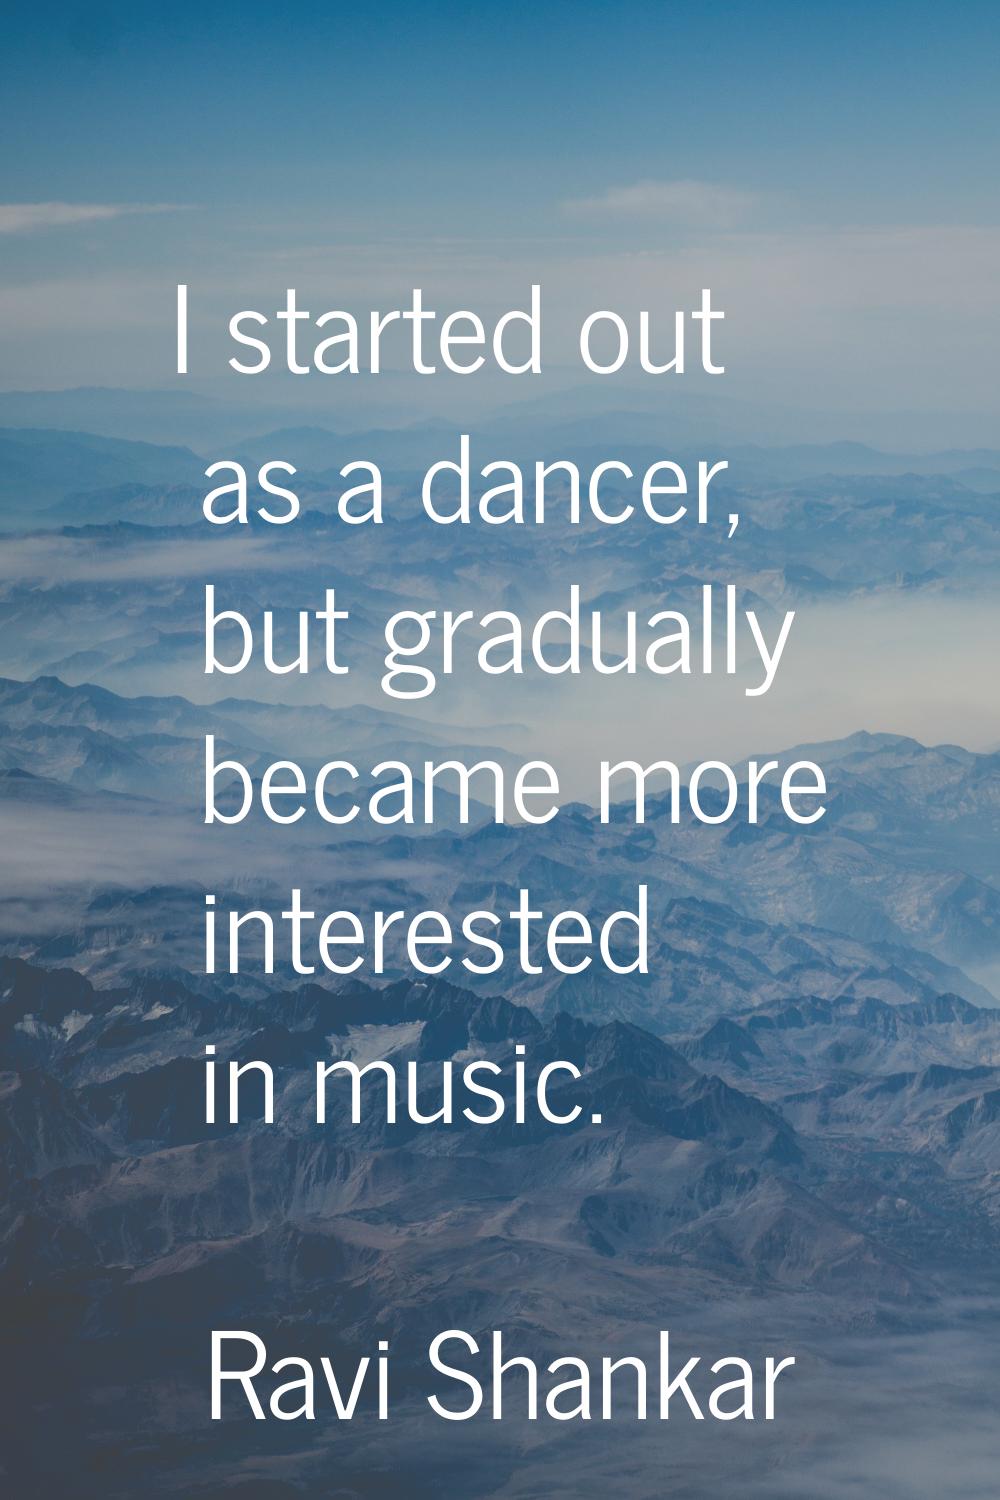 I started out as a dancer, but gradually became more interested in music.